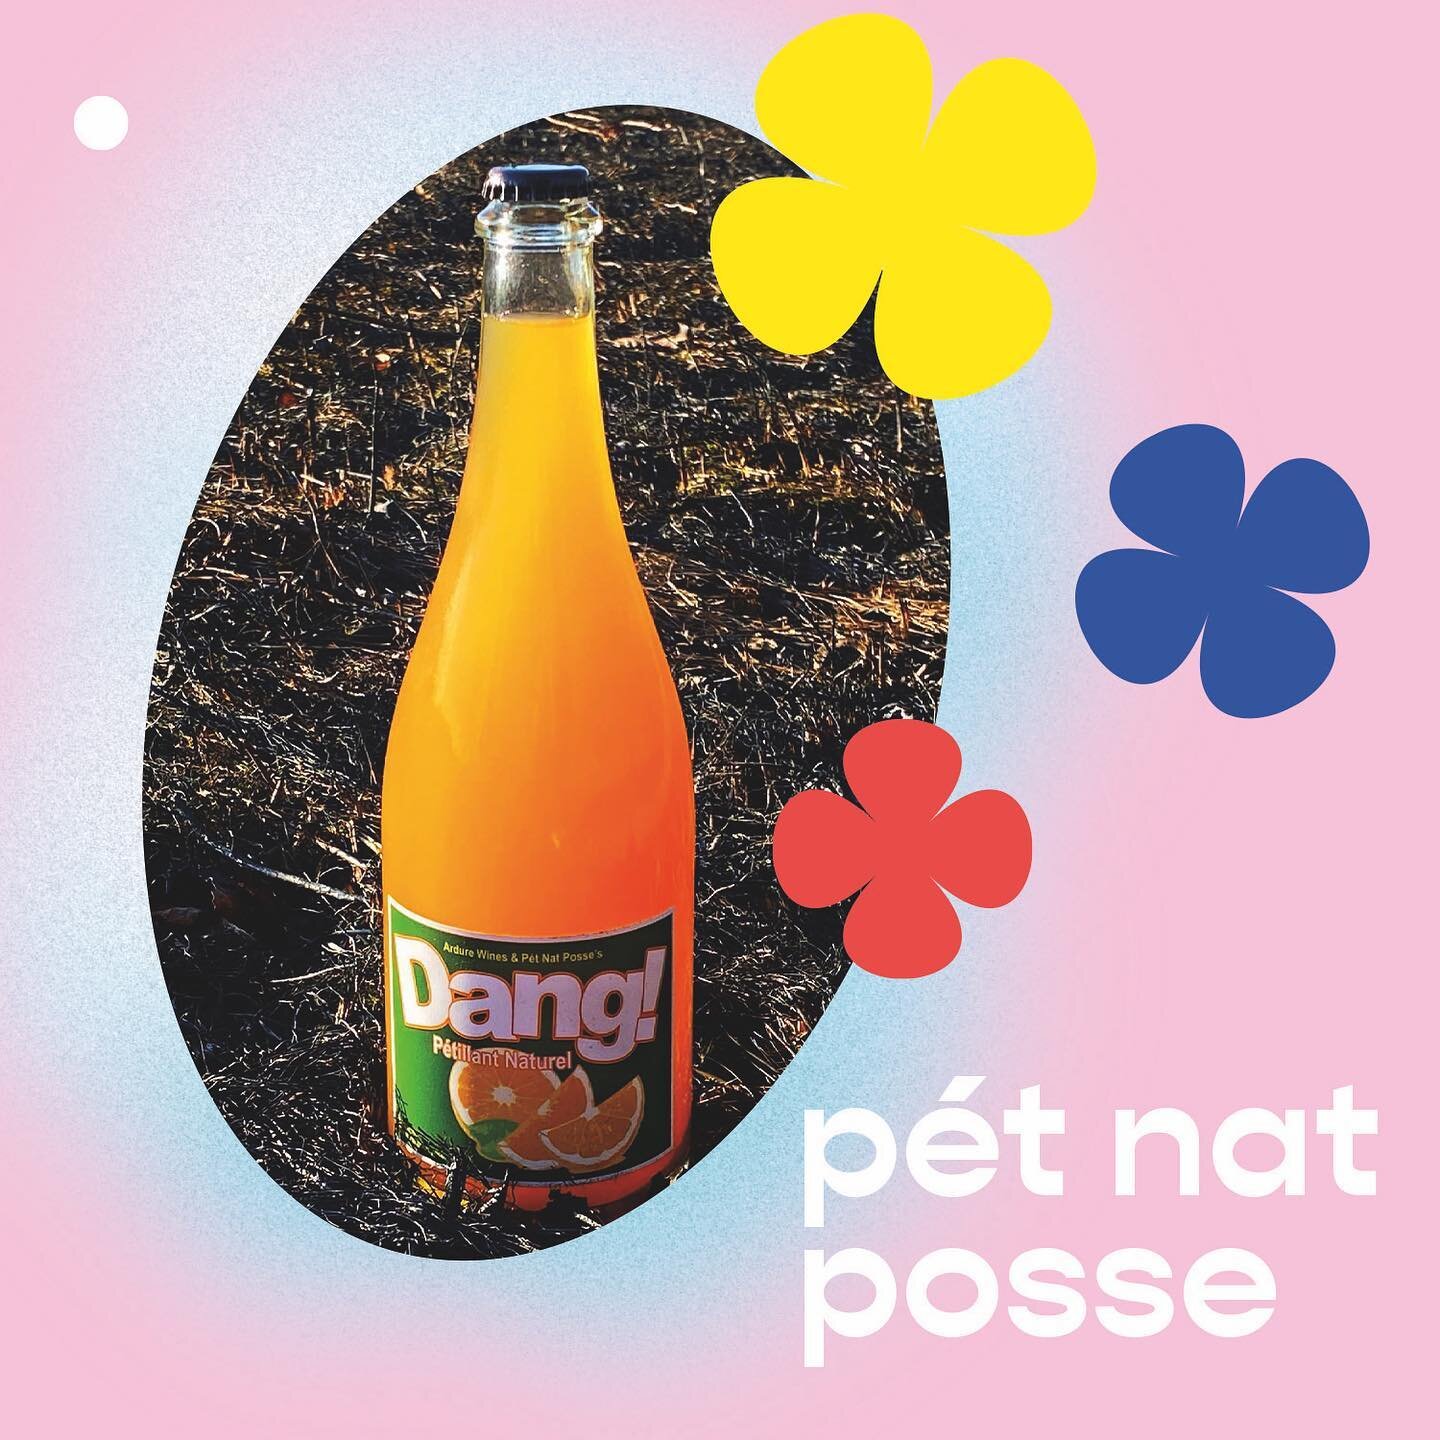 @petnatposse &rsquo;s online shop reads the following phrase in italicized font: &ldquo;We don&rsquo;t really know how we got to this point, but we&rsquo;re glad you&rsquo;re here with us!&rdquo; -- which feels apt for a natural wine appreciation pla